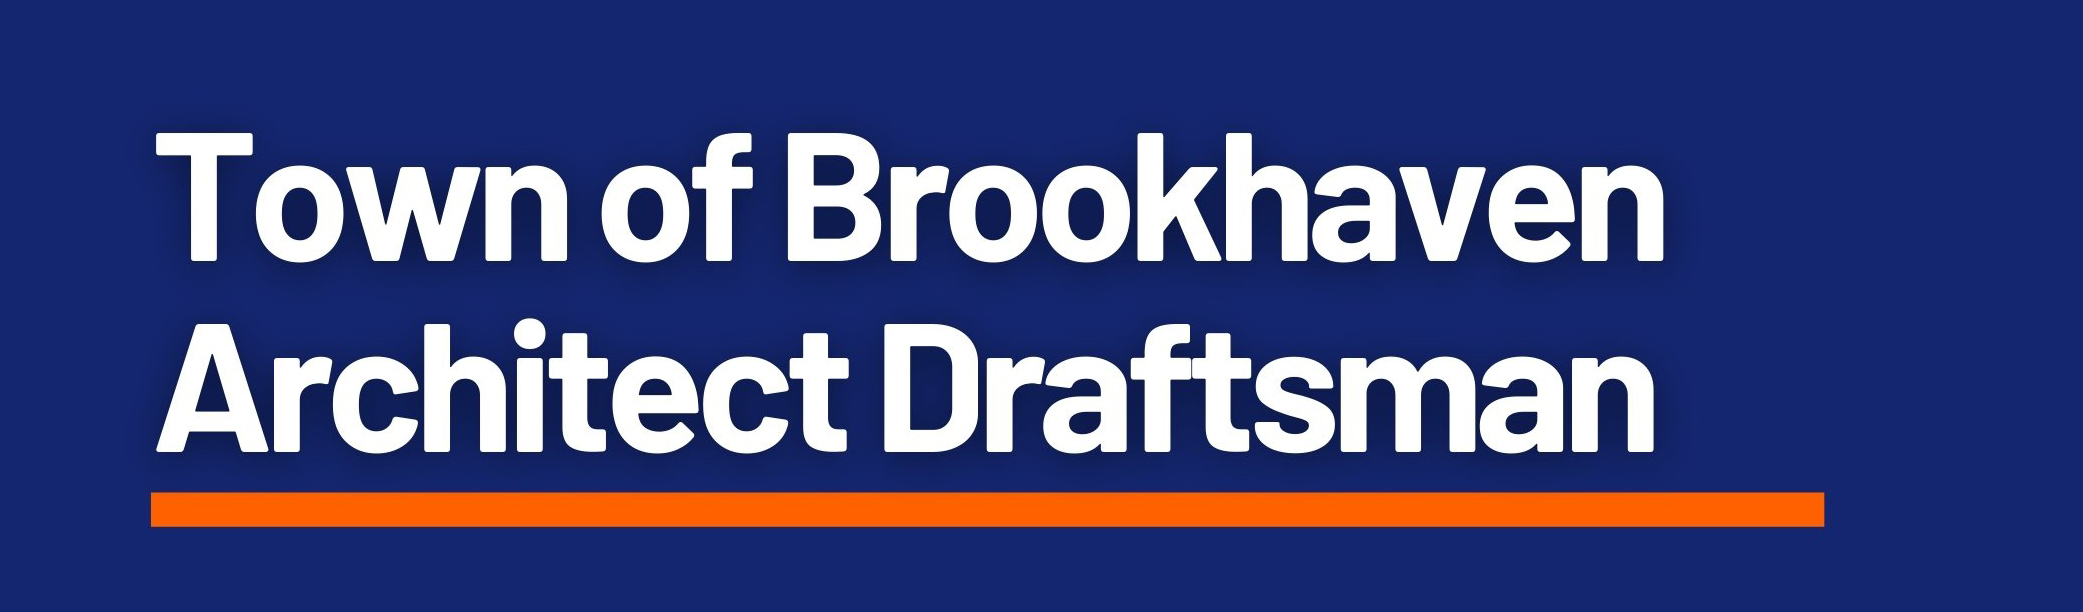 Town of Brookhaven Architect Draftsman